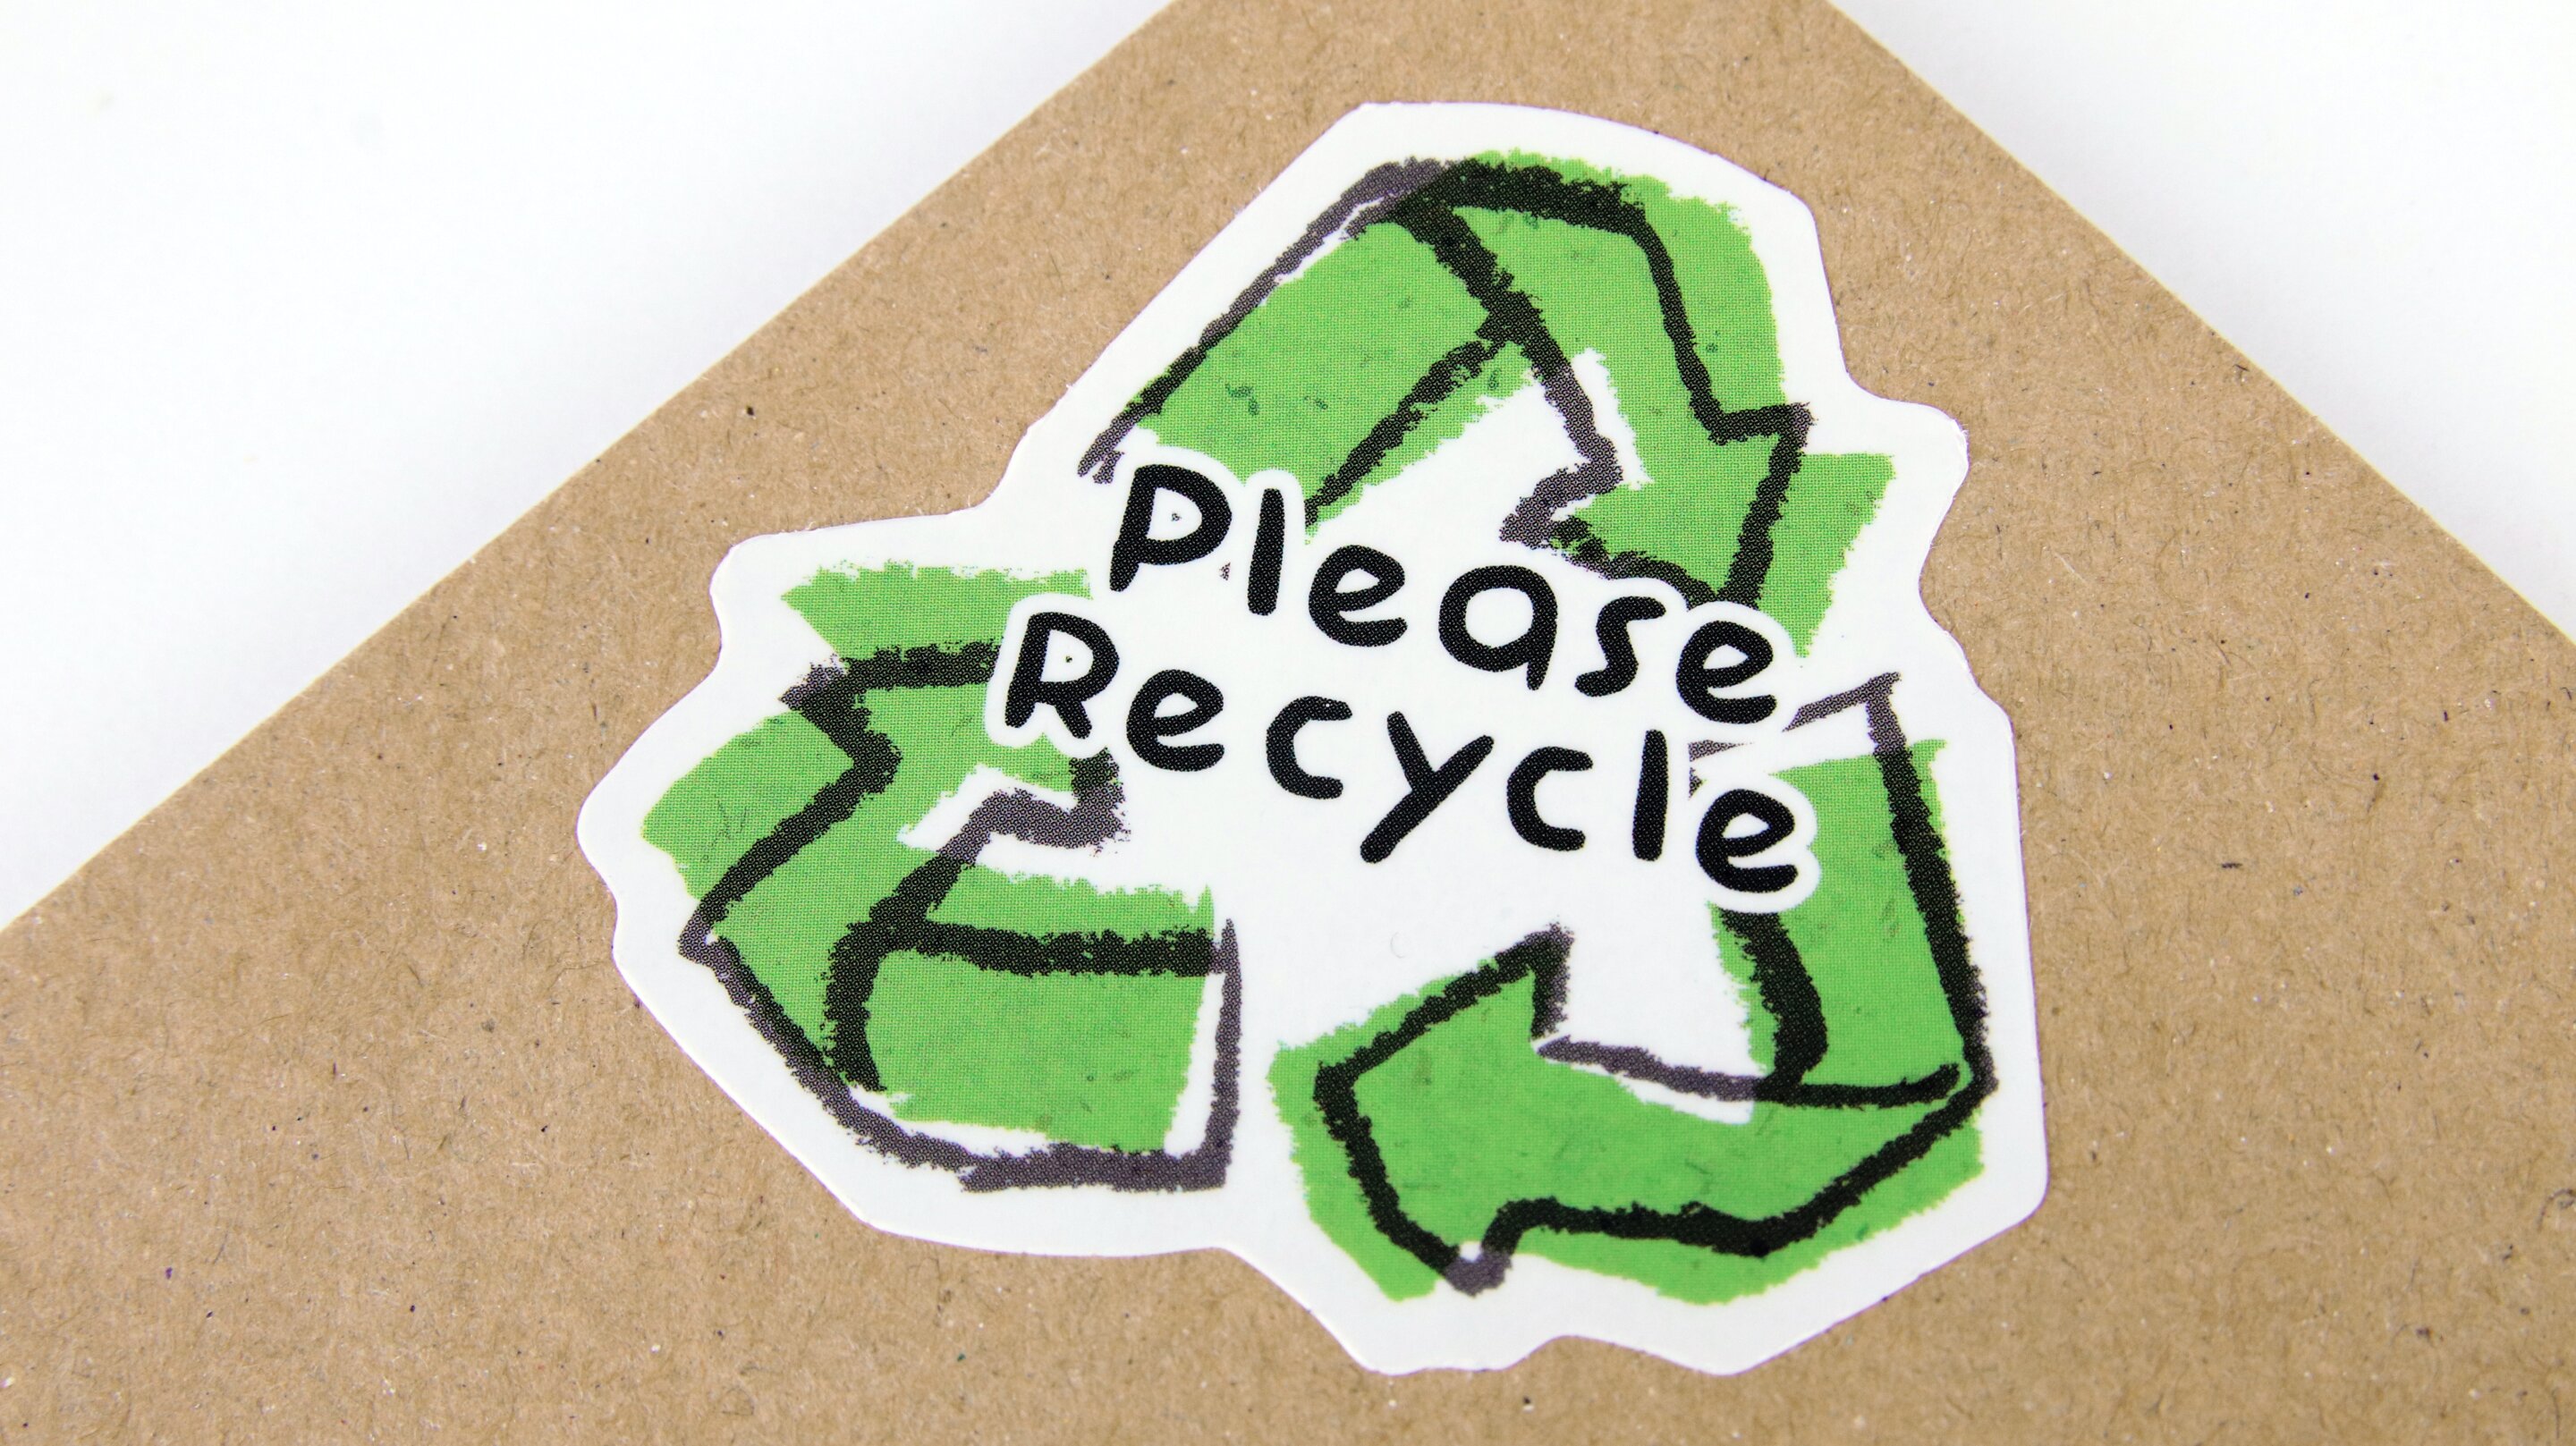 Study analyzes the benefits of recycled content claims amid supply uncertainty